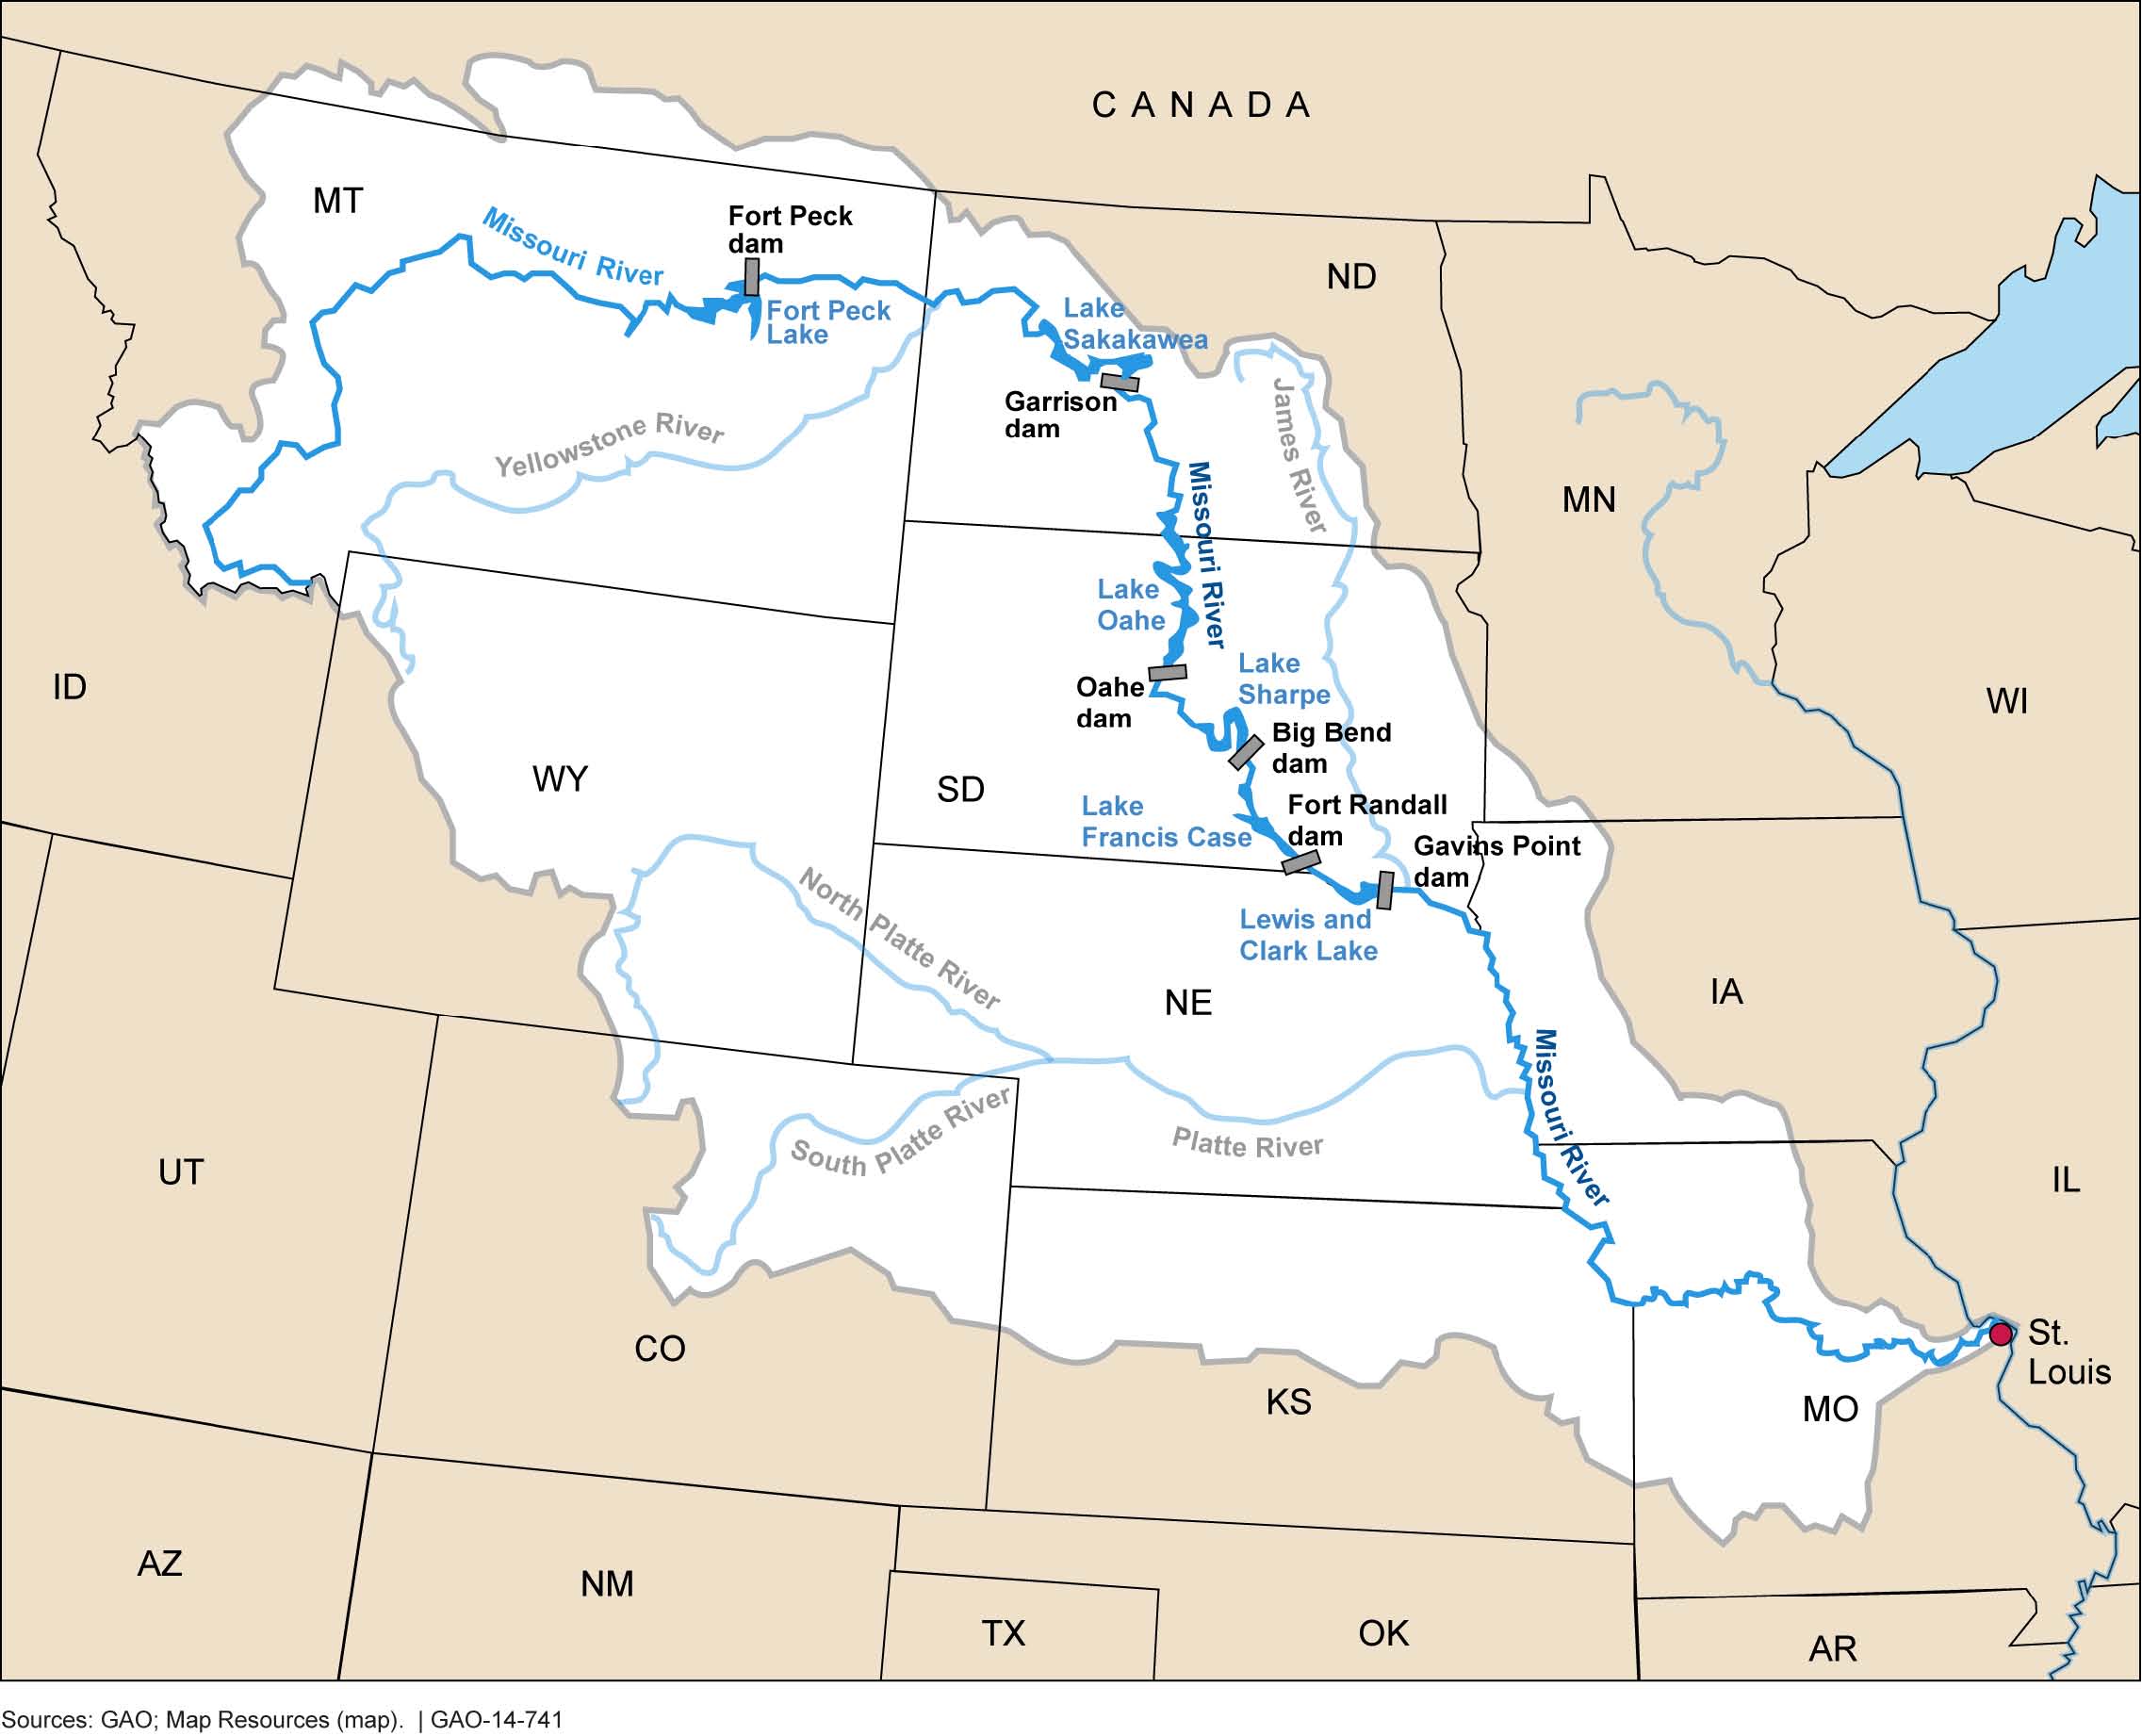 A map of the misouri river basin in the Upper Midwest.